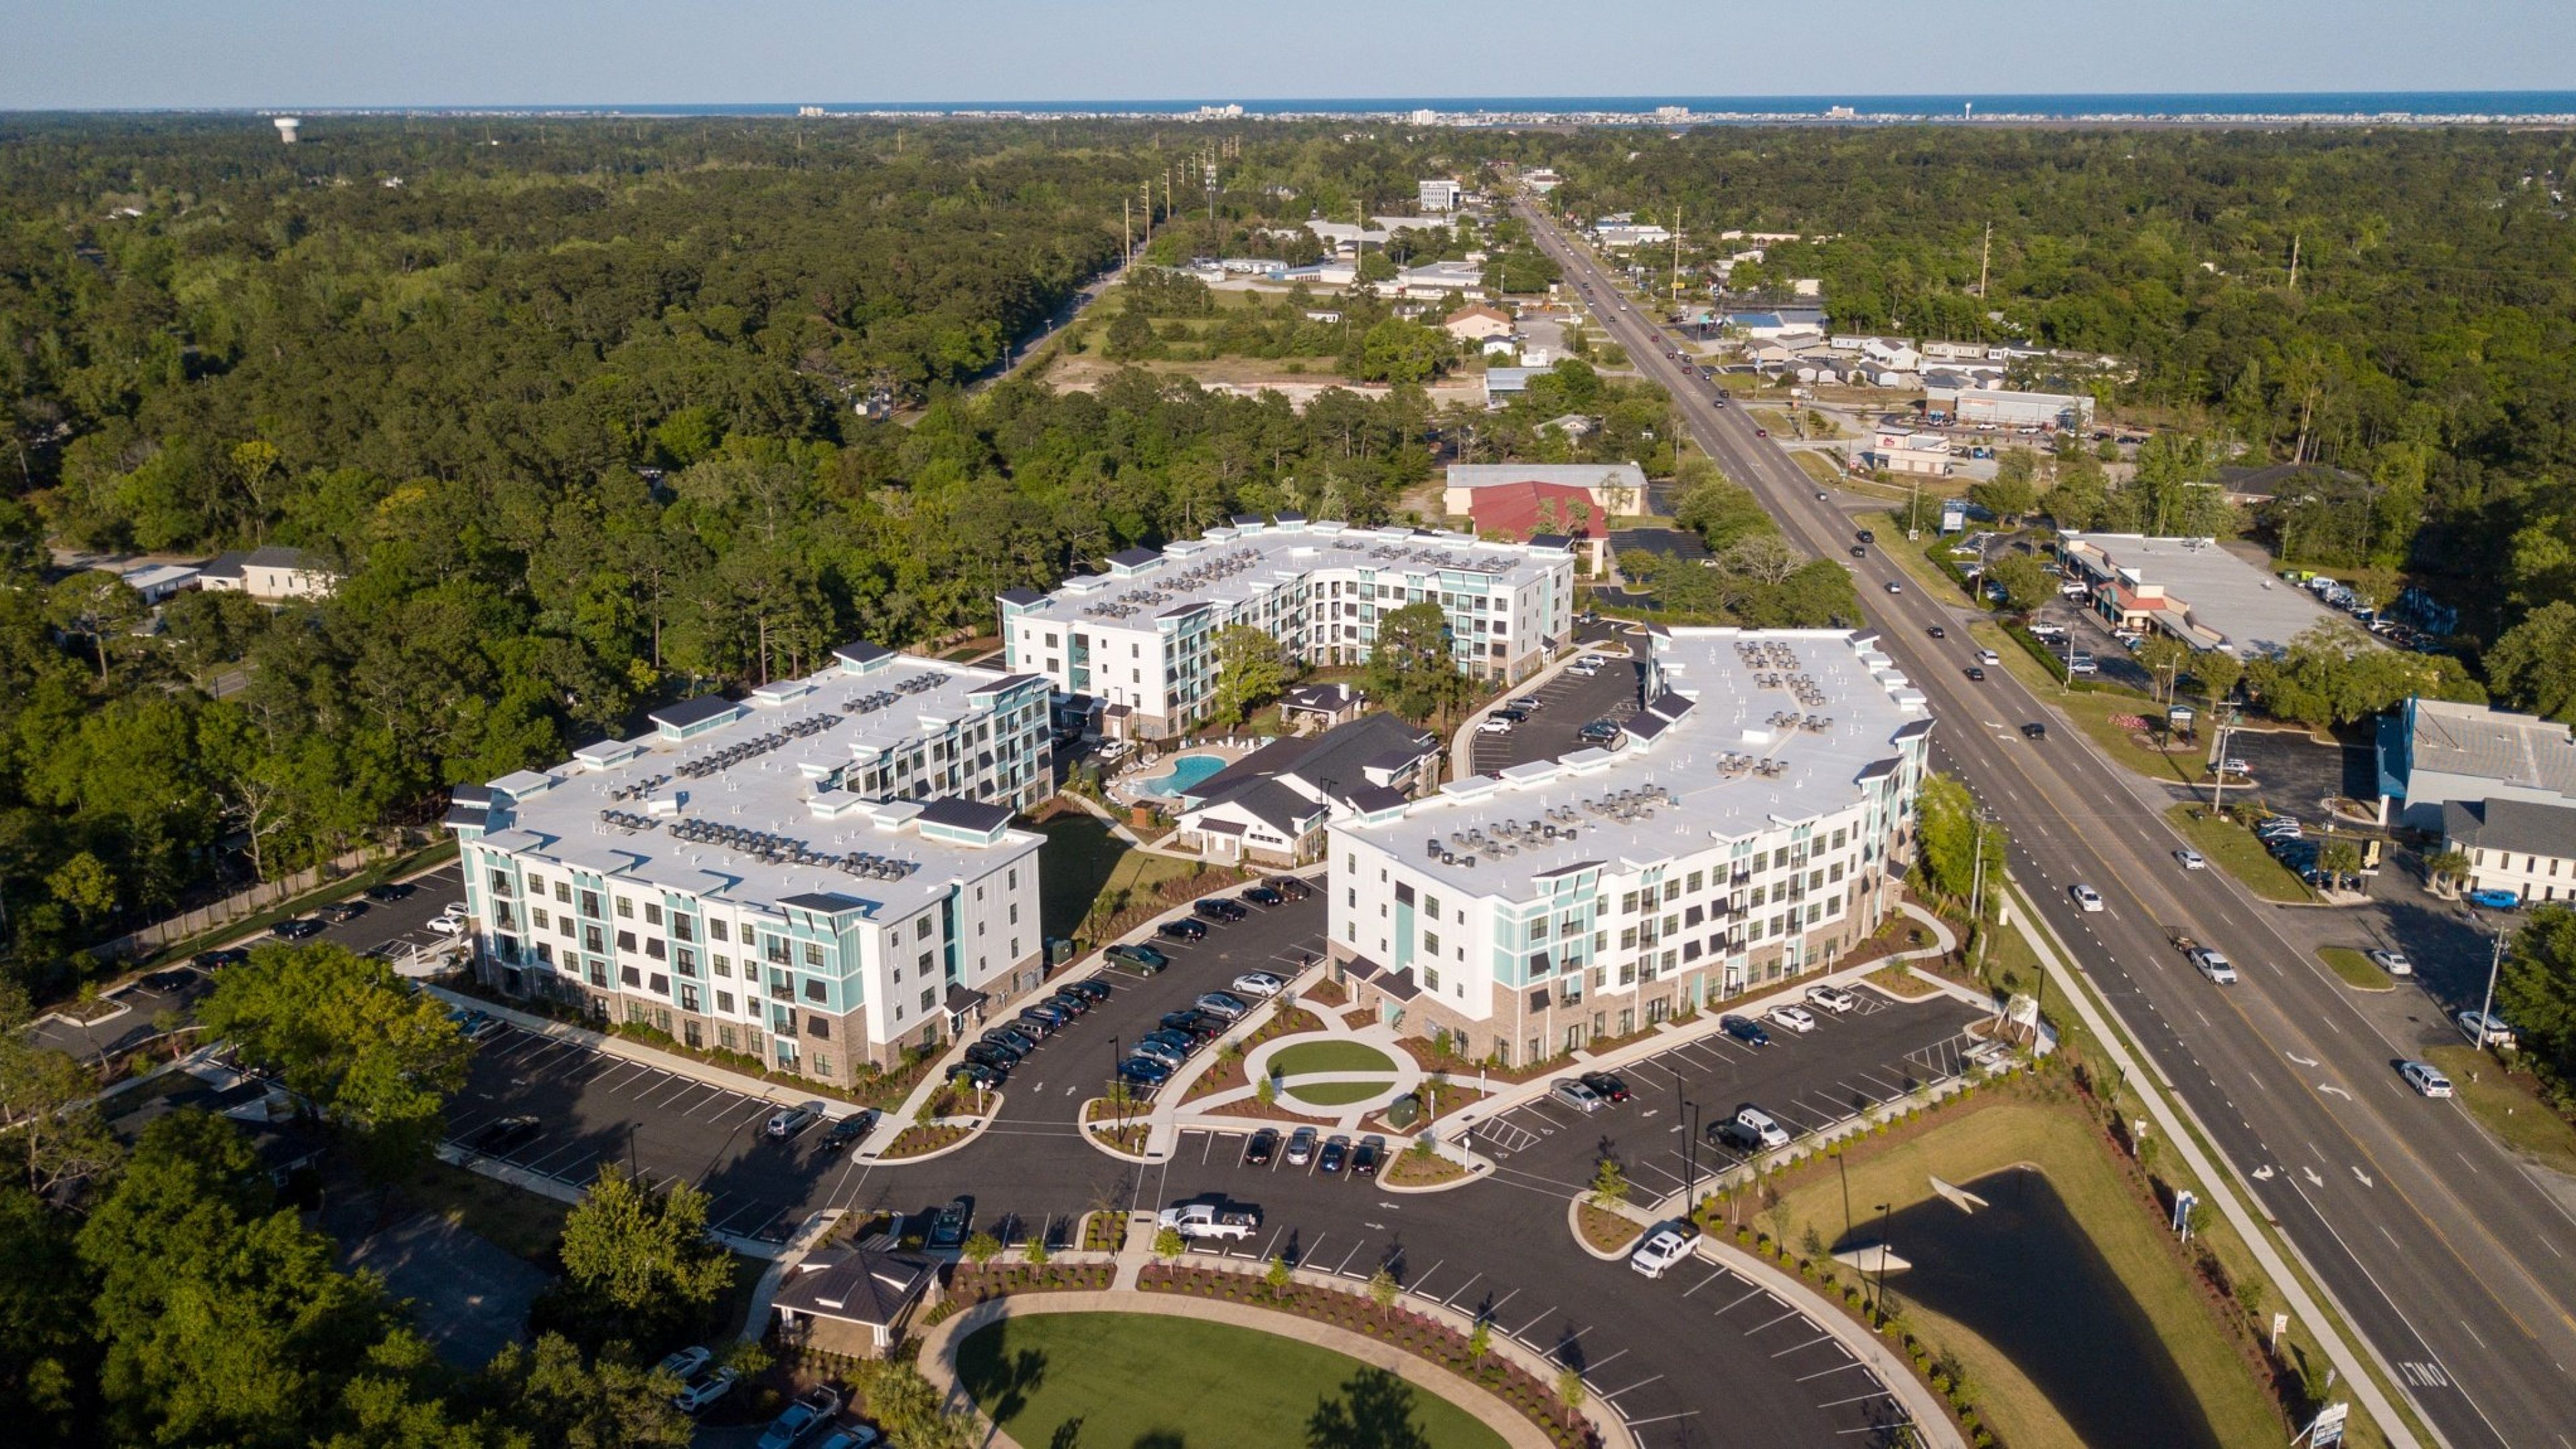 Hawthorne at Oleander aerial view showing the apartment building and surrounding area of Wilmington, NC